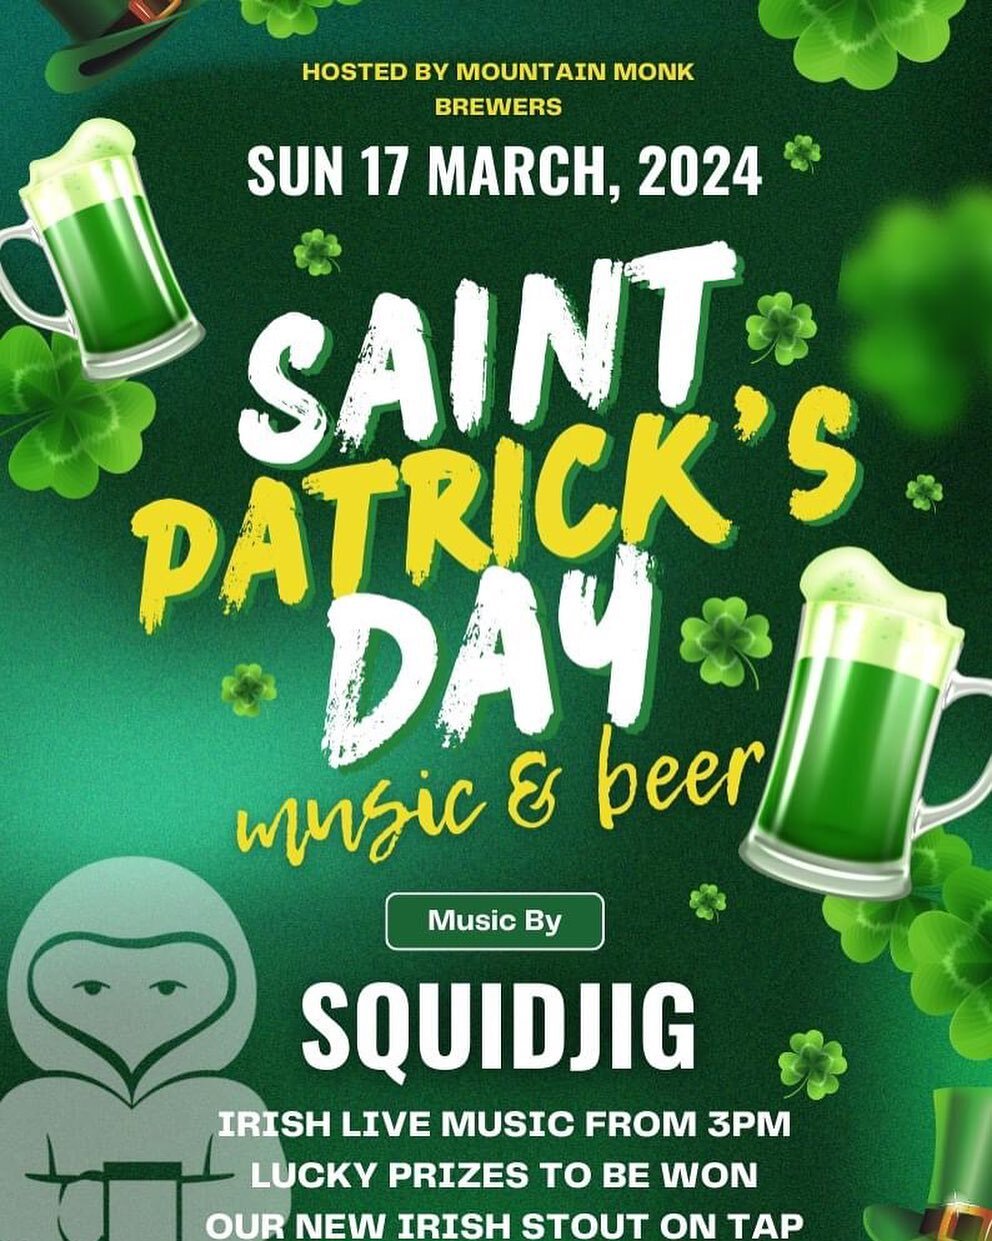 🍀 St. Patrick&rsquo;s Day Extravaganza! 🍀

🎶 Save the Date: Sunday, March 17, 2024 🎉

✅ Live Music by Squidjig starting at 3pm 🎵
✅ Enjoy our NEW Irish Stout on tap 🍺
✅ Delicious Food Specials🍀
✅ Lucky Prizes to be WON! 🎁

Don&rsquo;t miss out